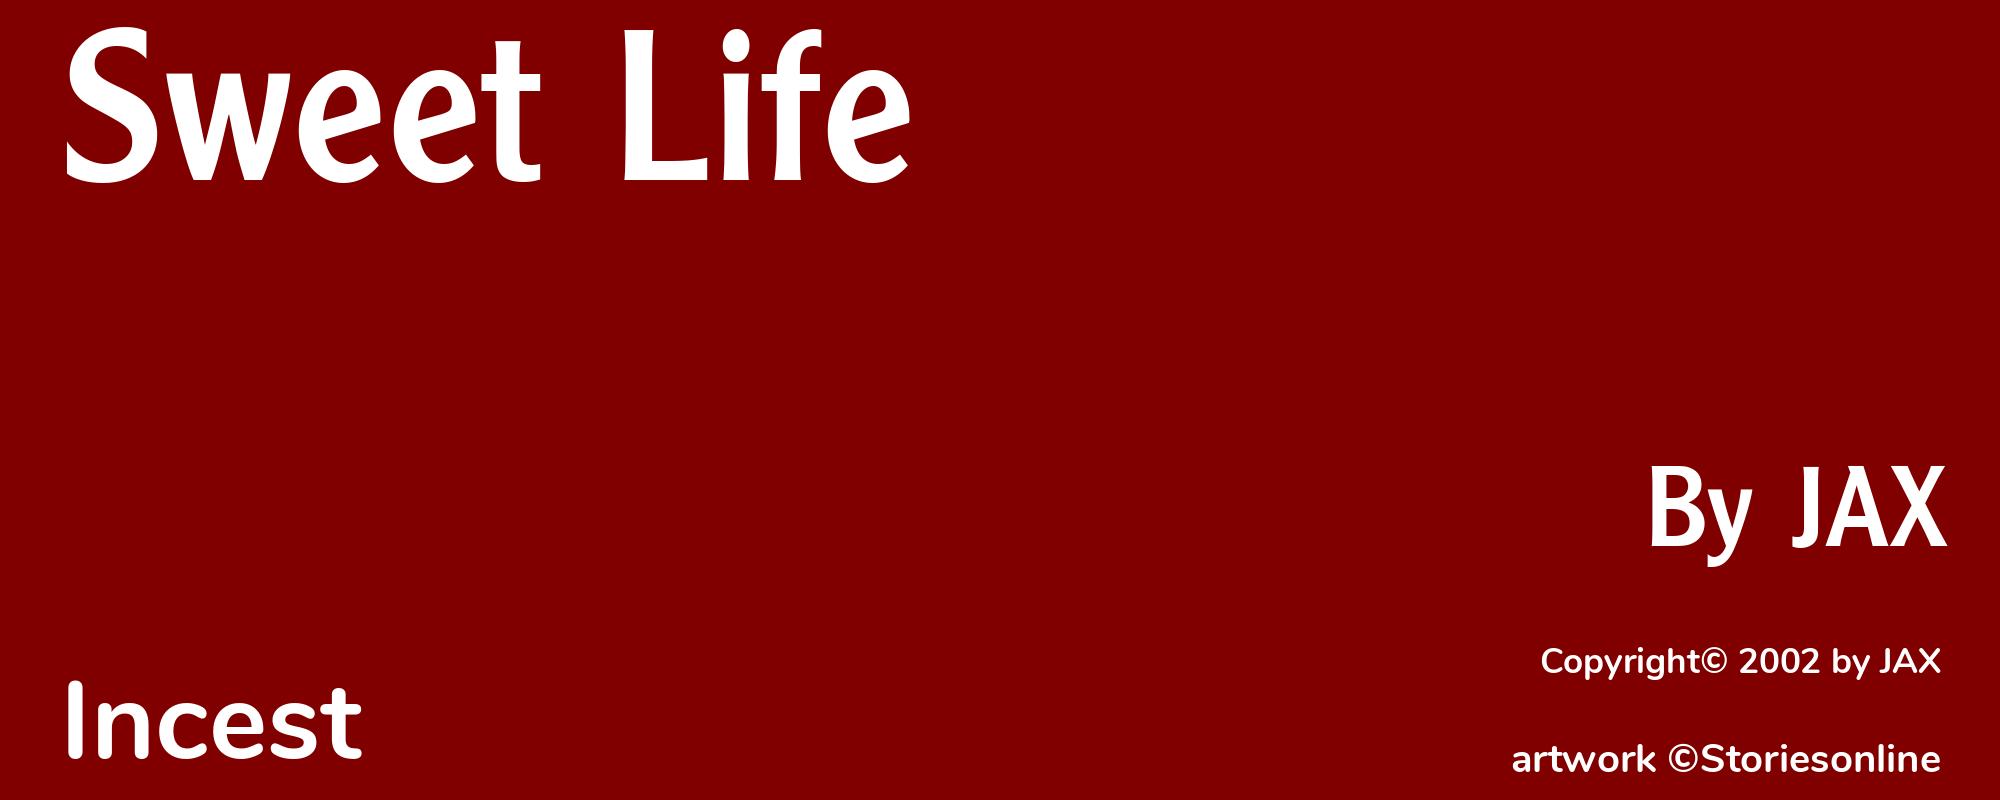 Sweet Life - Cover